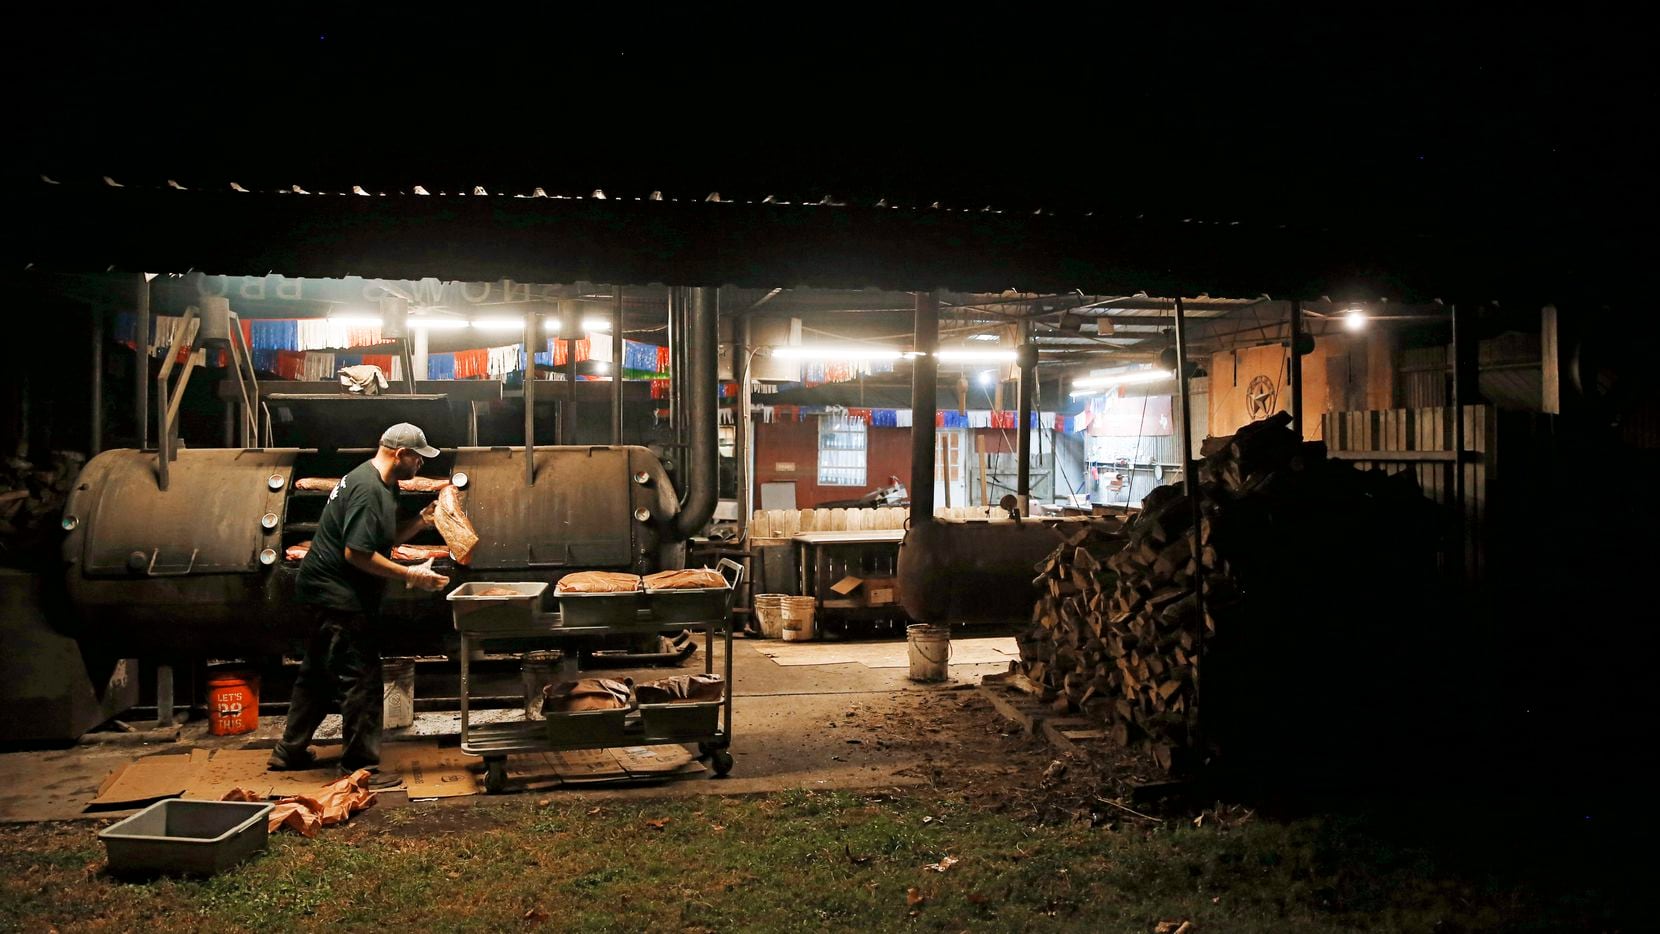 Clay Cowgill works on putting the briskets on the smoker around 10 p.m. at Snow's BBQ in...